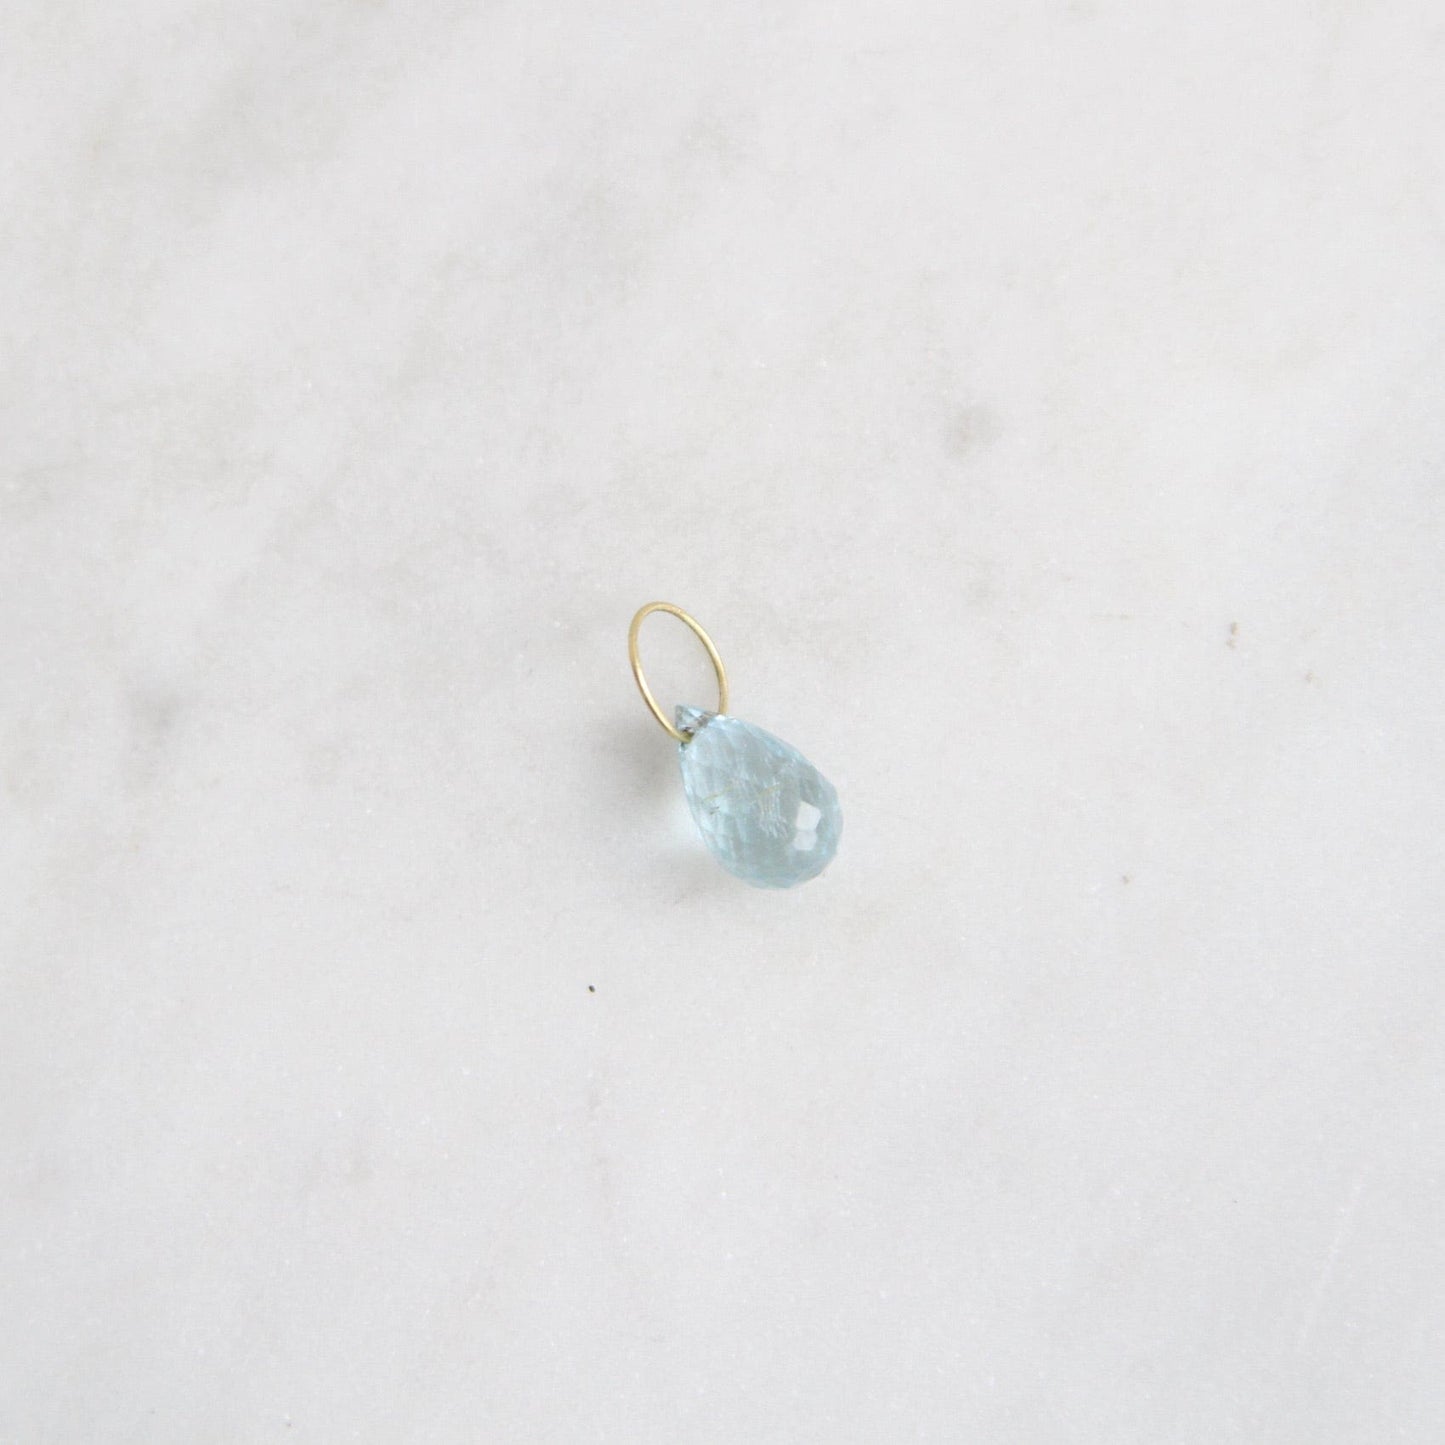 CHM Blue Topaz - High Faceted Drop Gemstone on 14K Gold Wire